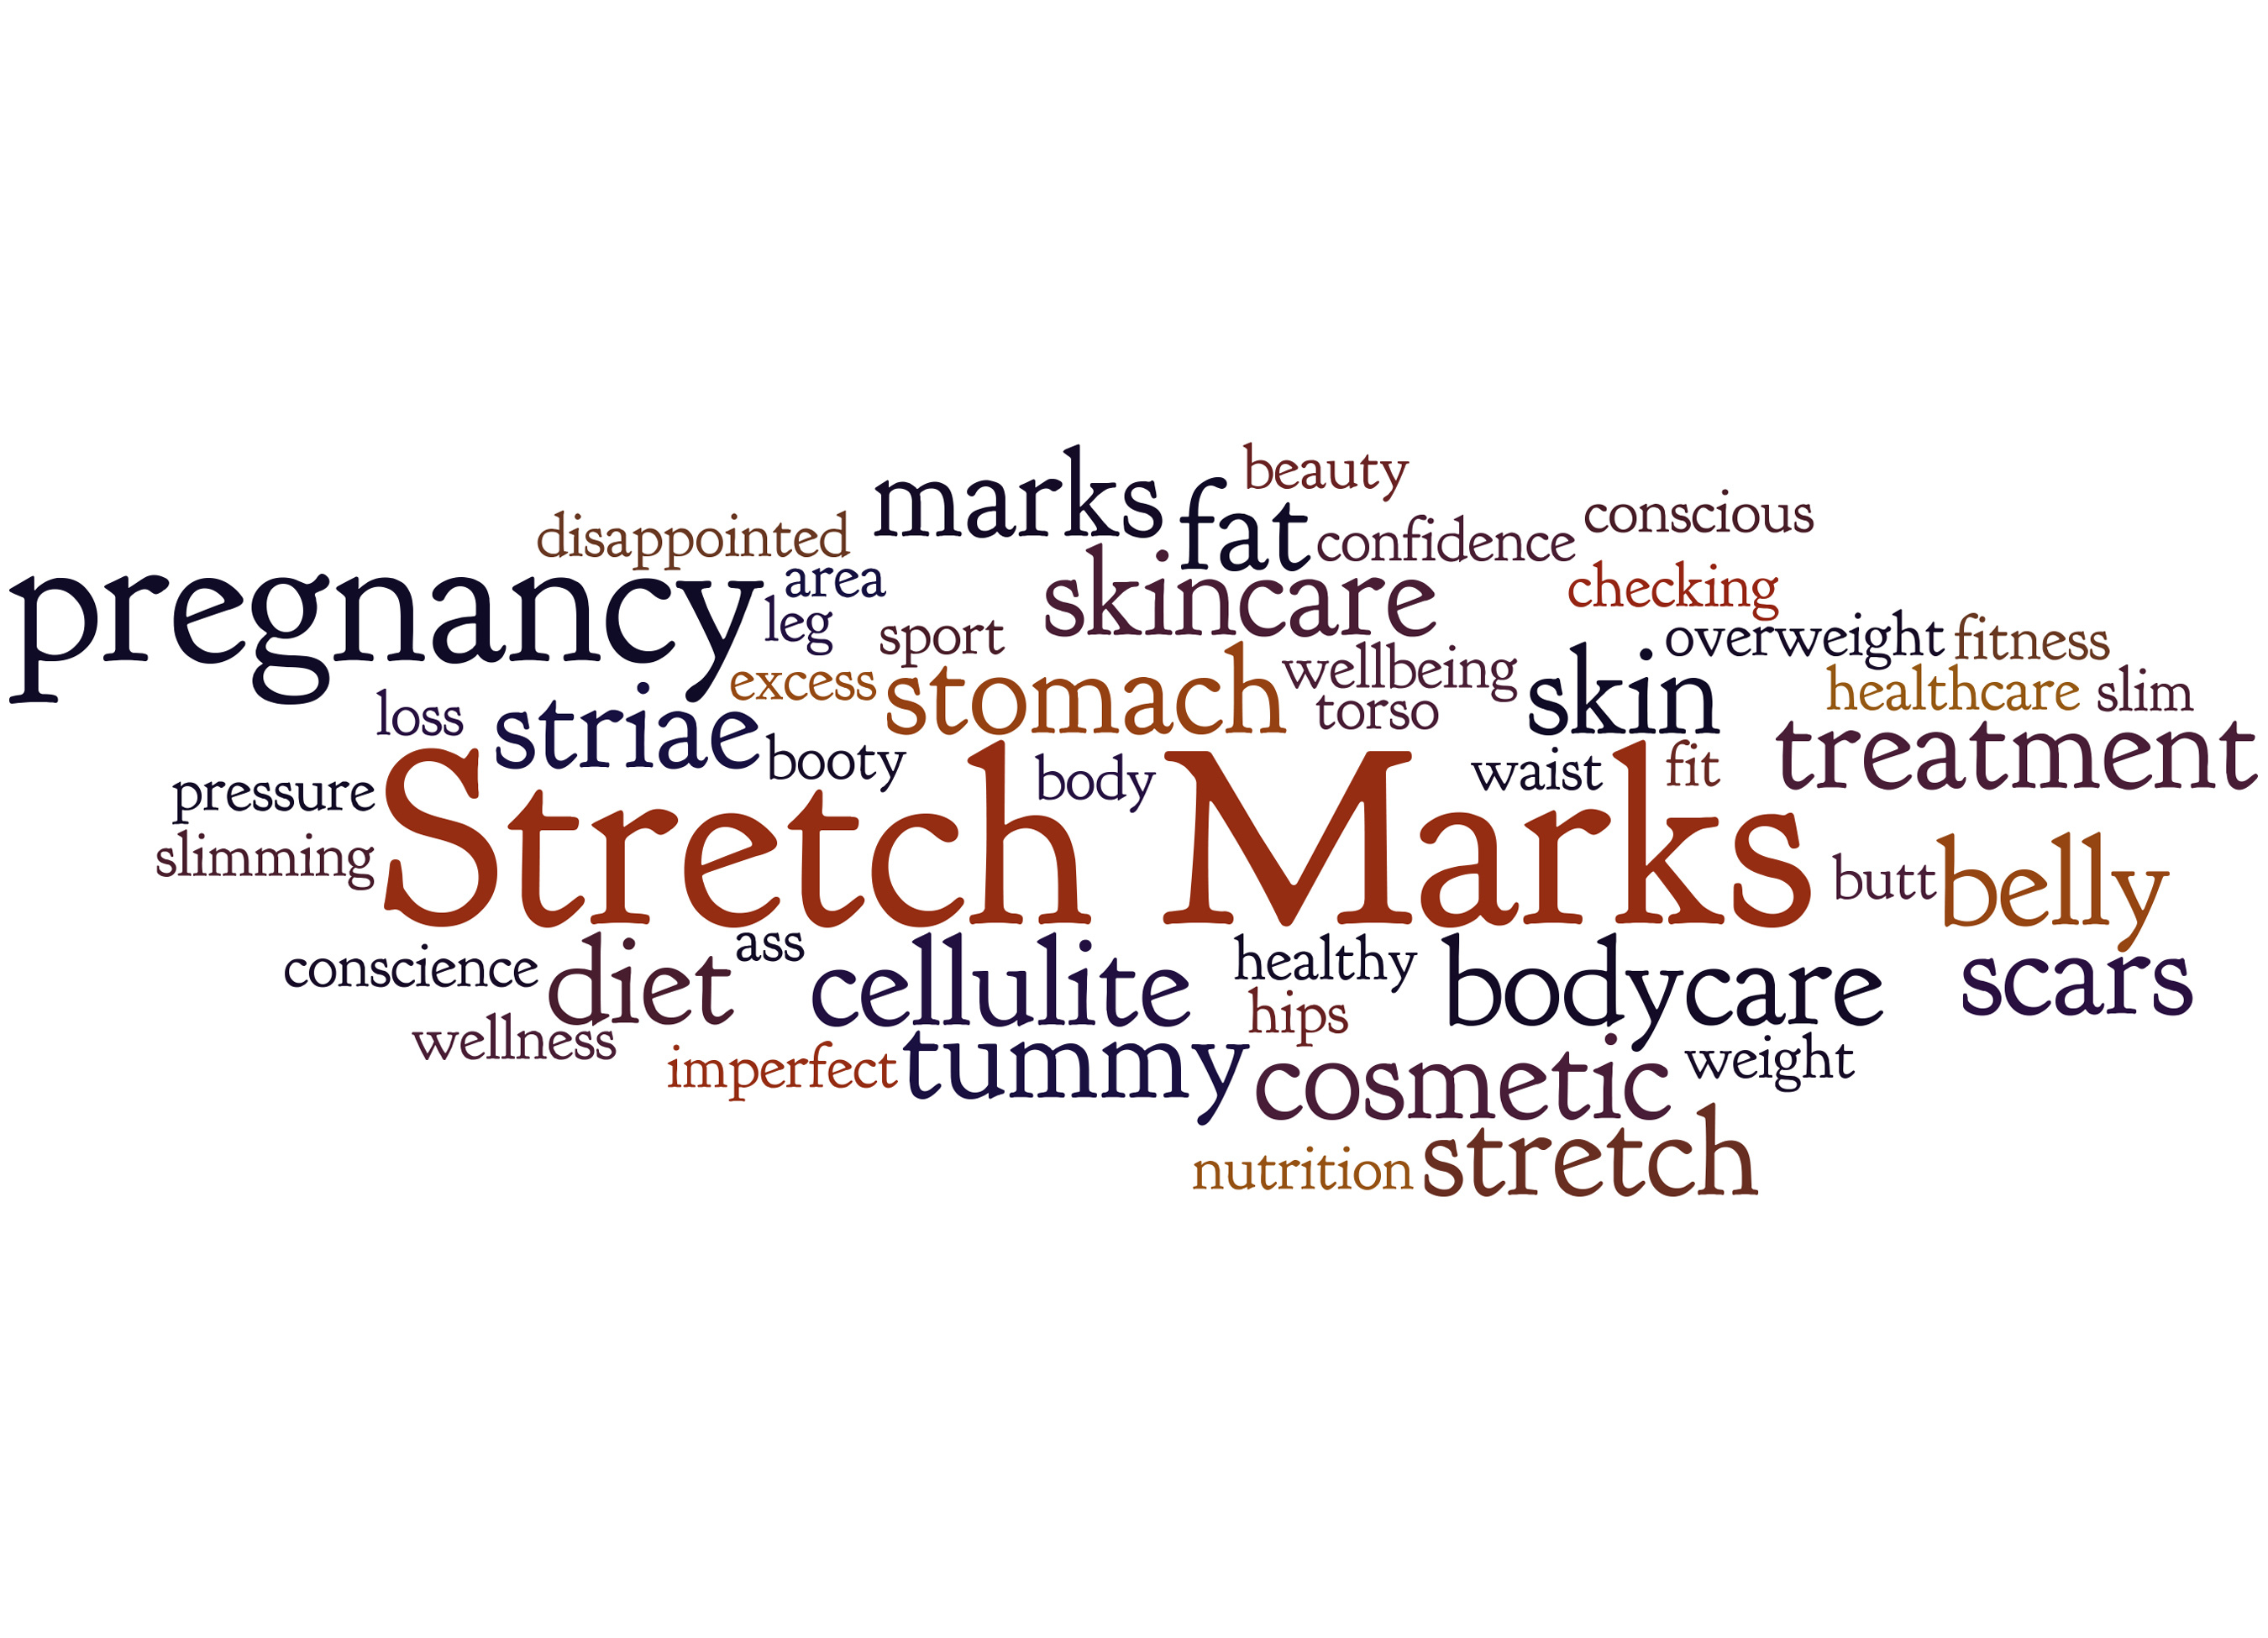 Why Do People Get Stretch Marks?